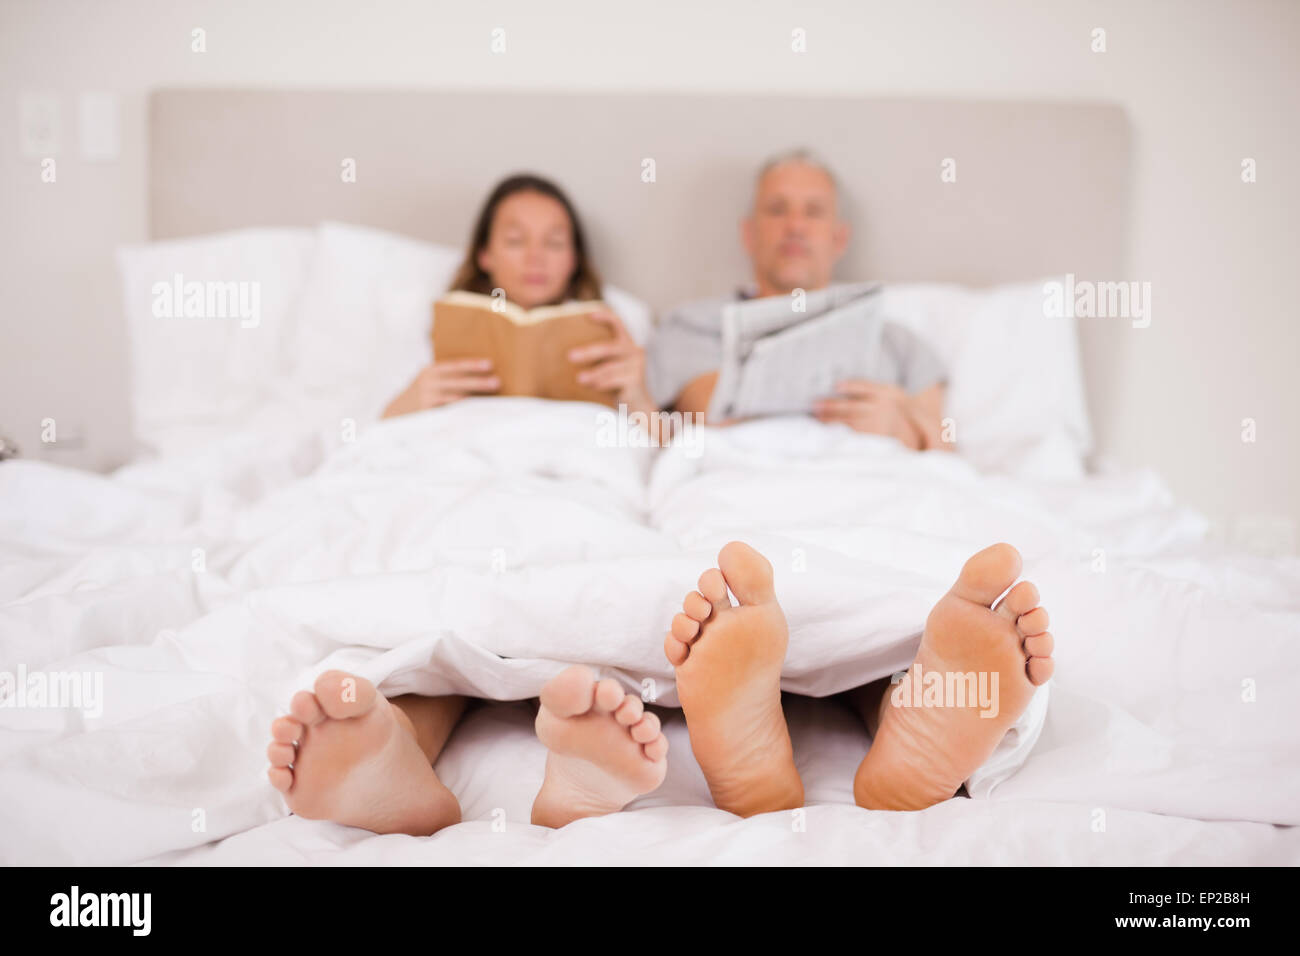 Woman reading a book while her companion is reading the news Stock Photo